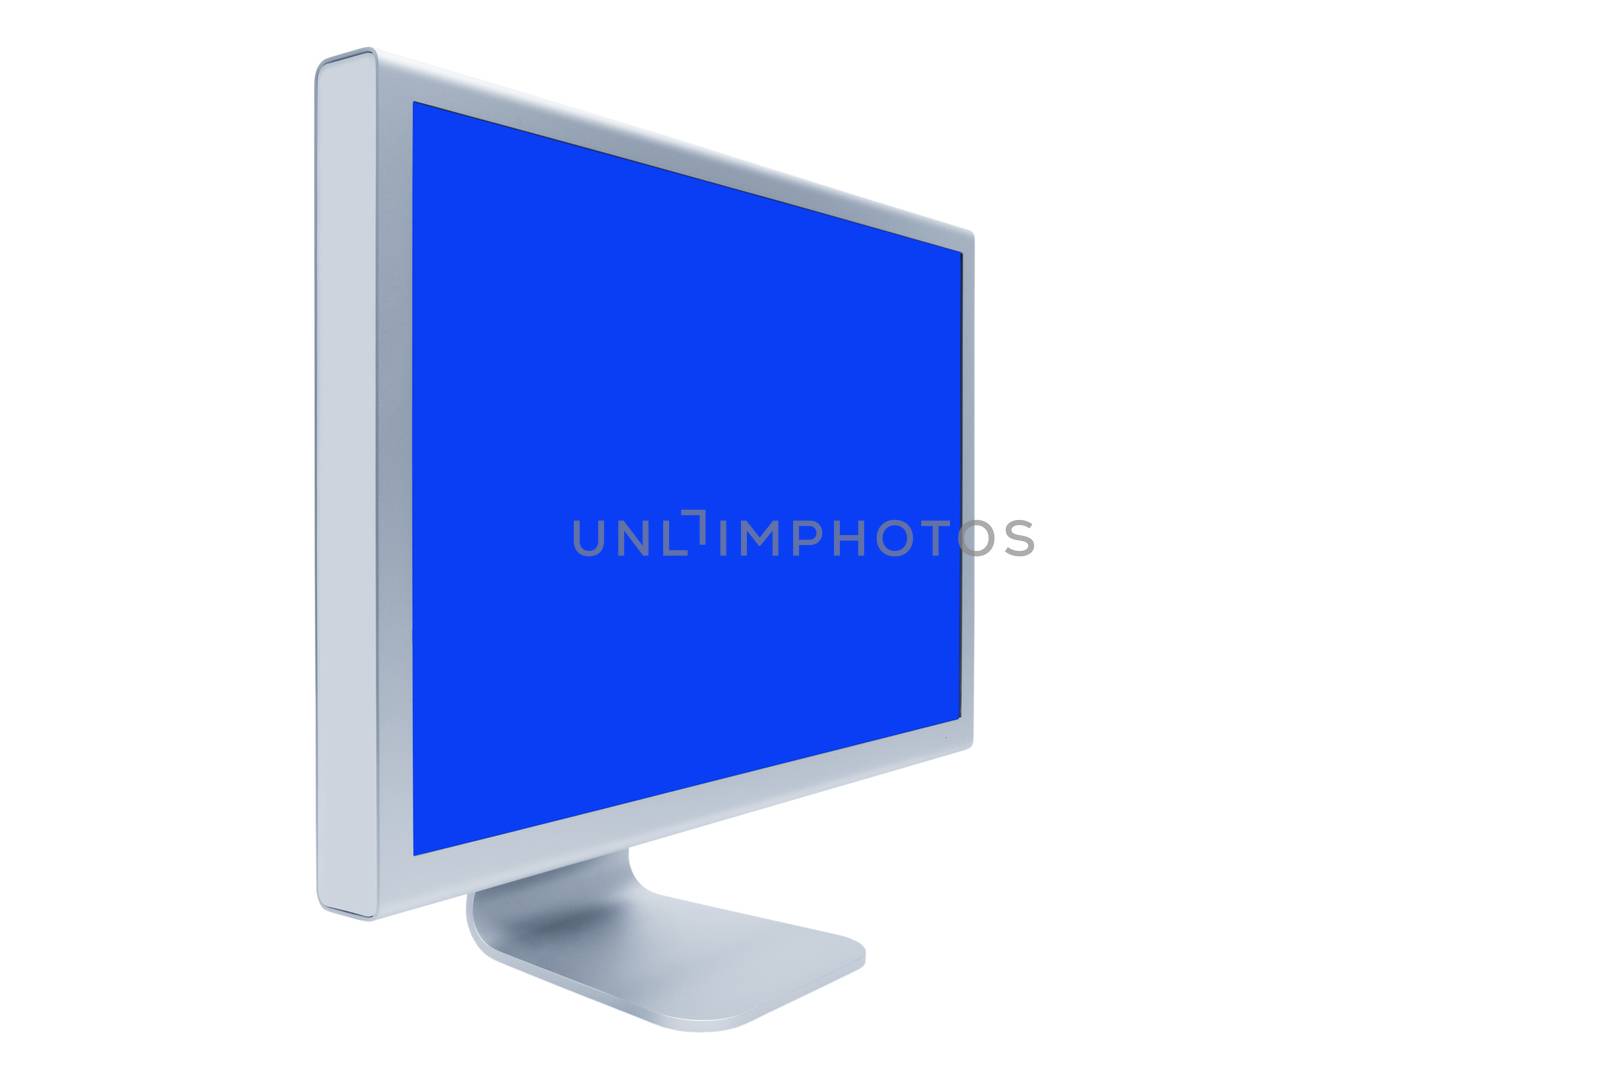 The modern and thin monitor on a white background